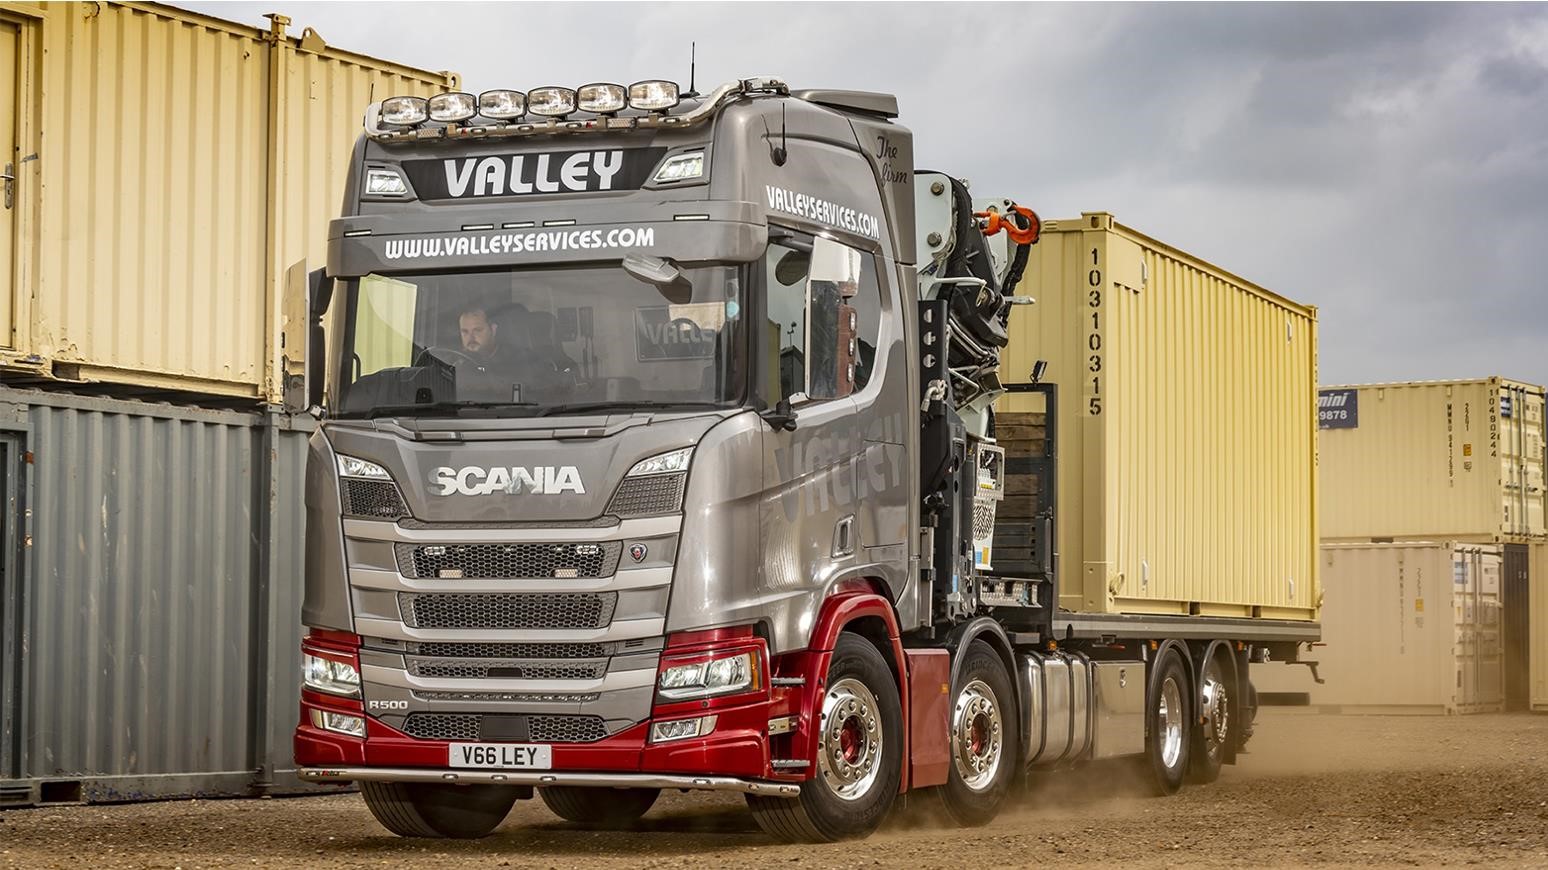 Valley Traction Services Limited Offers Diverse Range Of Services With Help From Scania R-Series Trucks